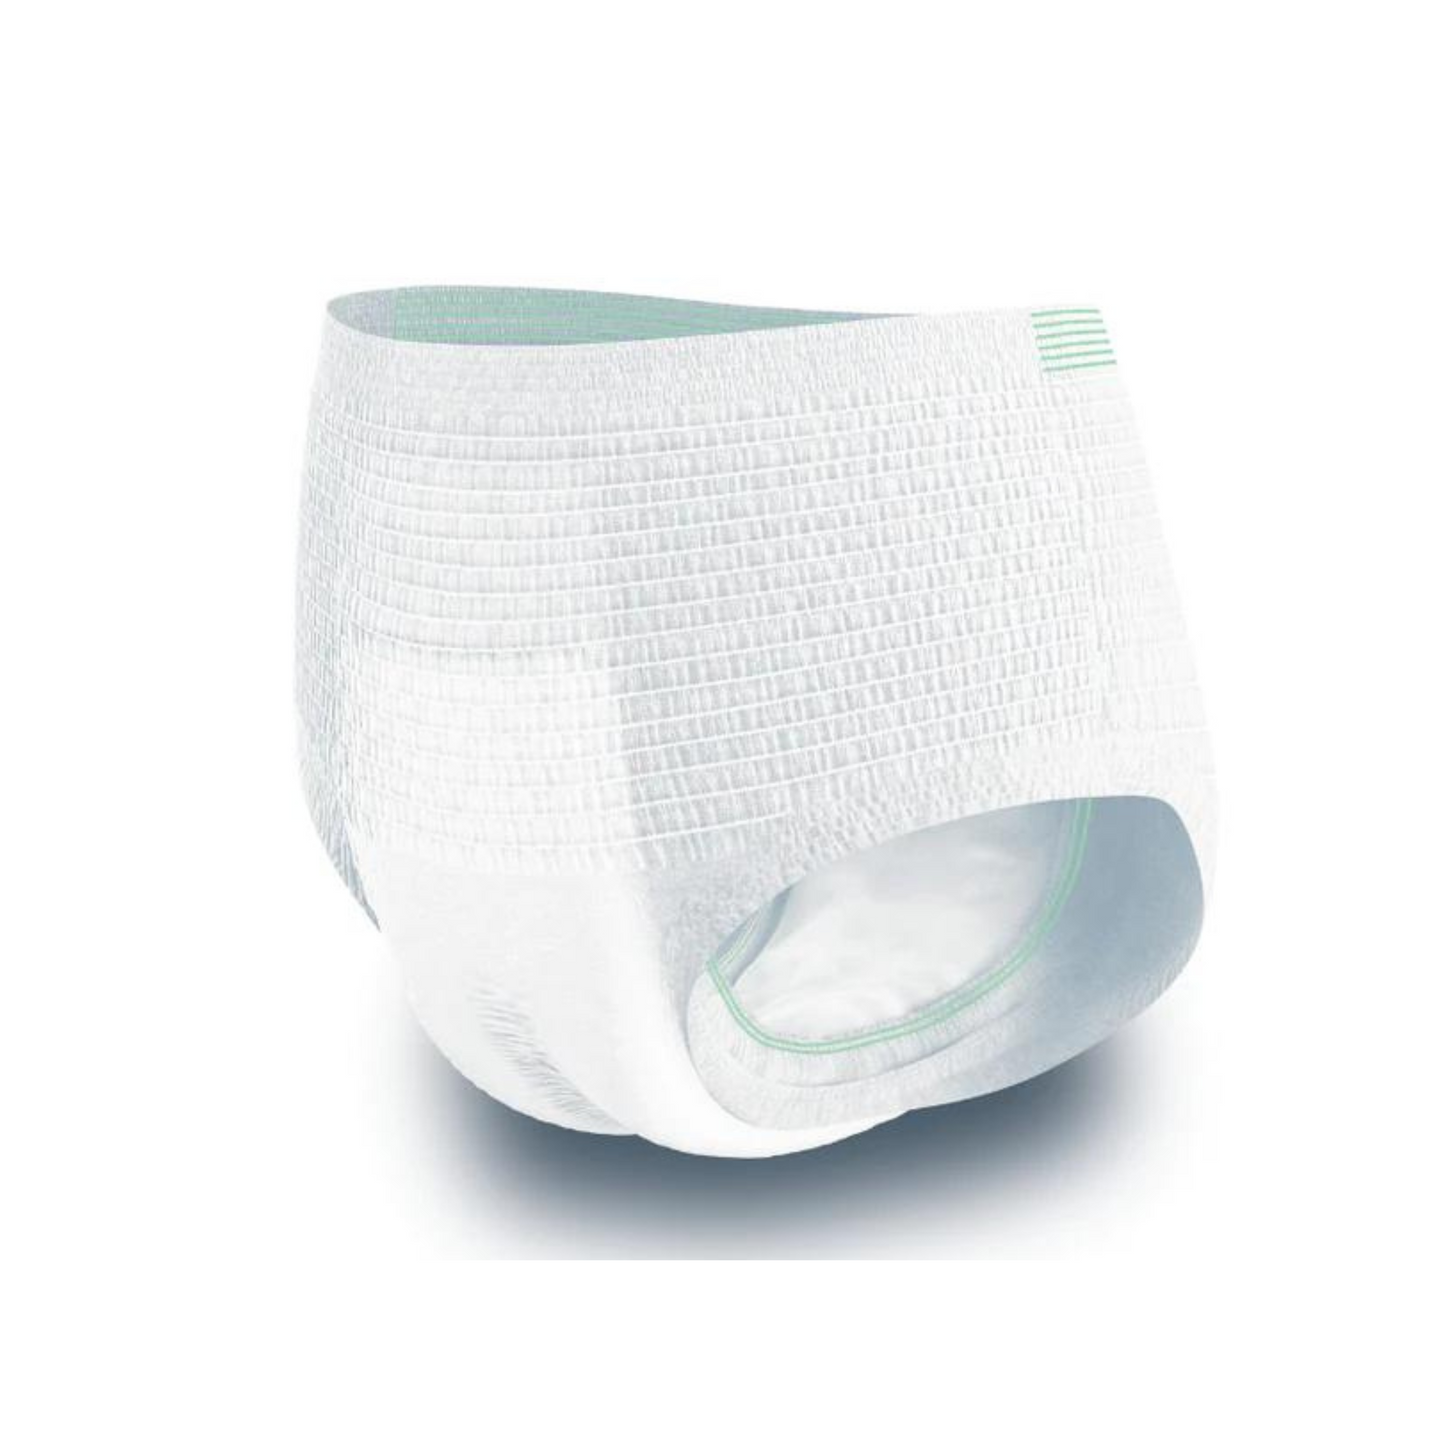 TENA adult nappy for inconsitence